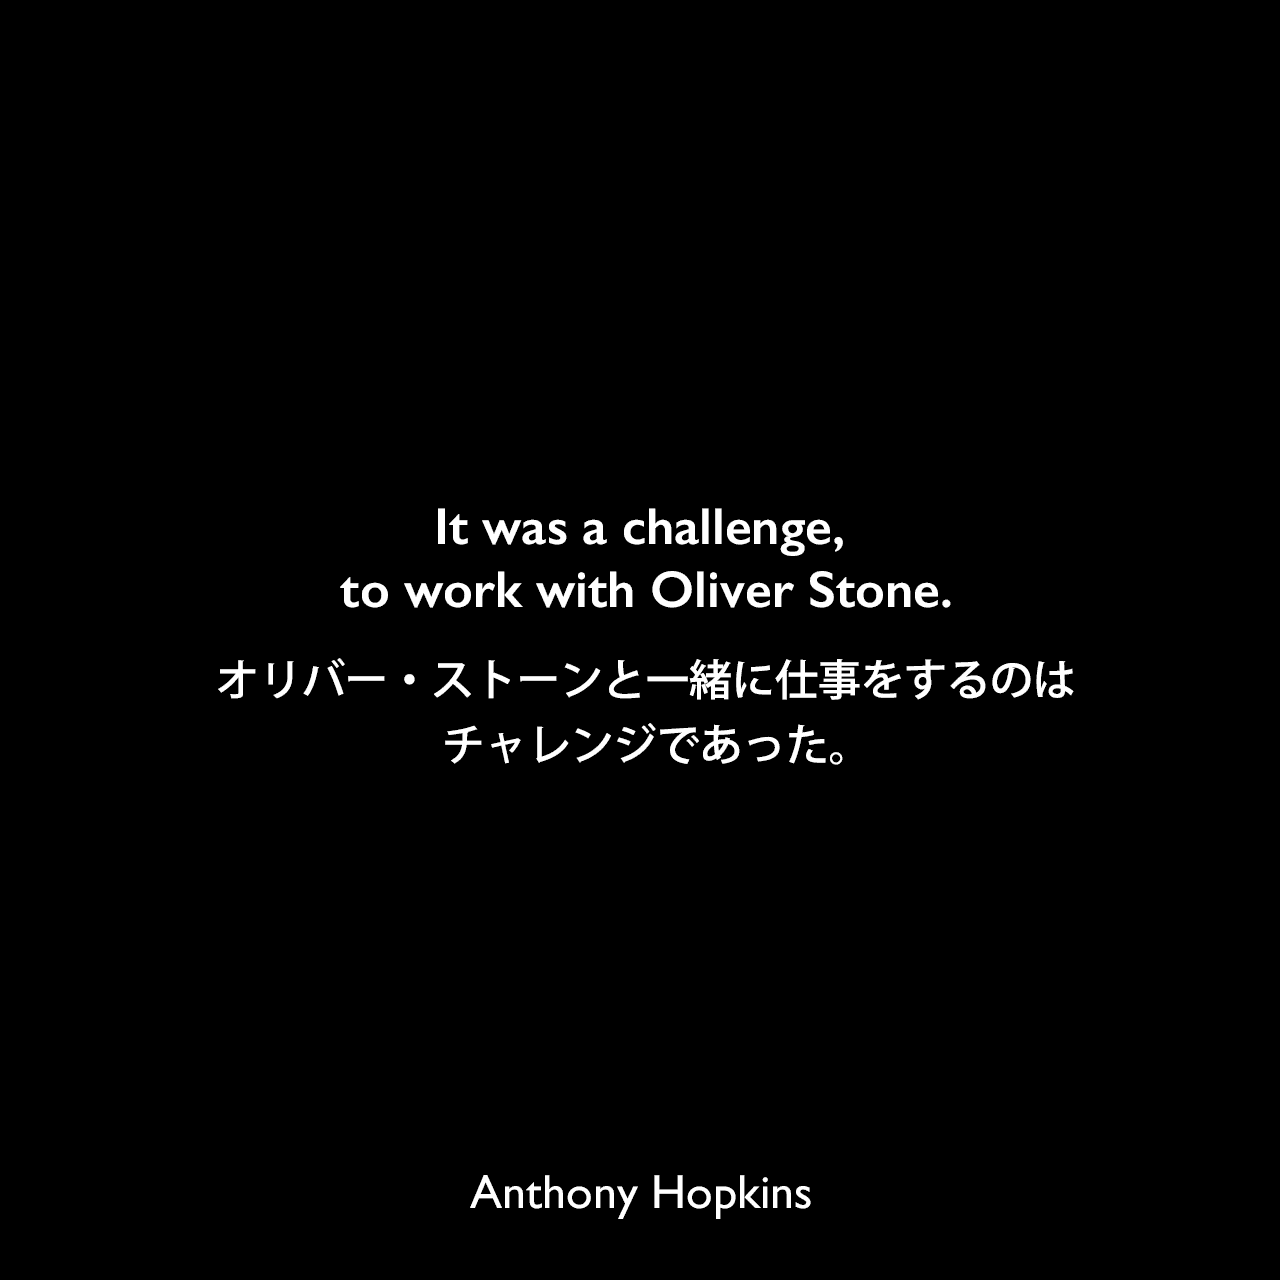 It was a challenge, to work with Oliver Stone.オリバー・ストーンと一緒に仕事をするのはチャレンジであった。Anthony Hopkins